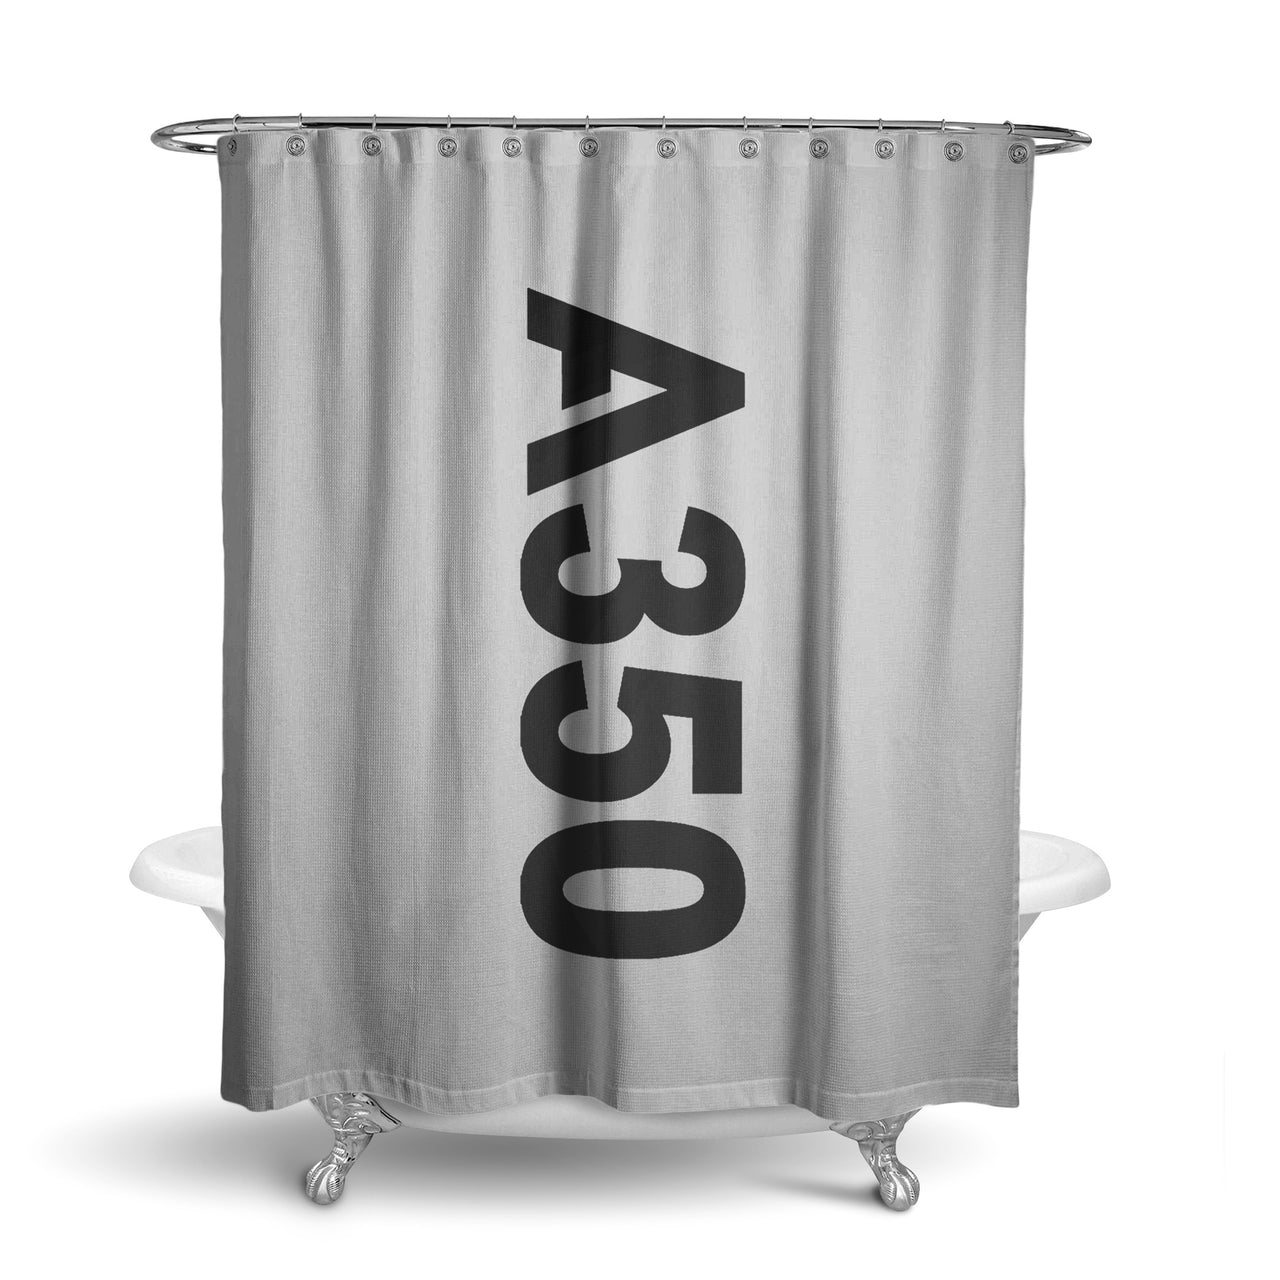 A350 Text Designed Shower Curtains